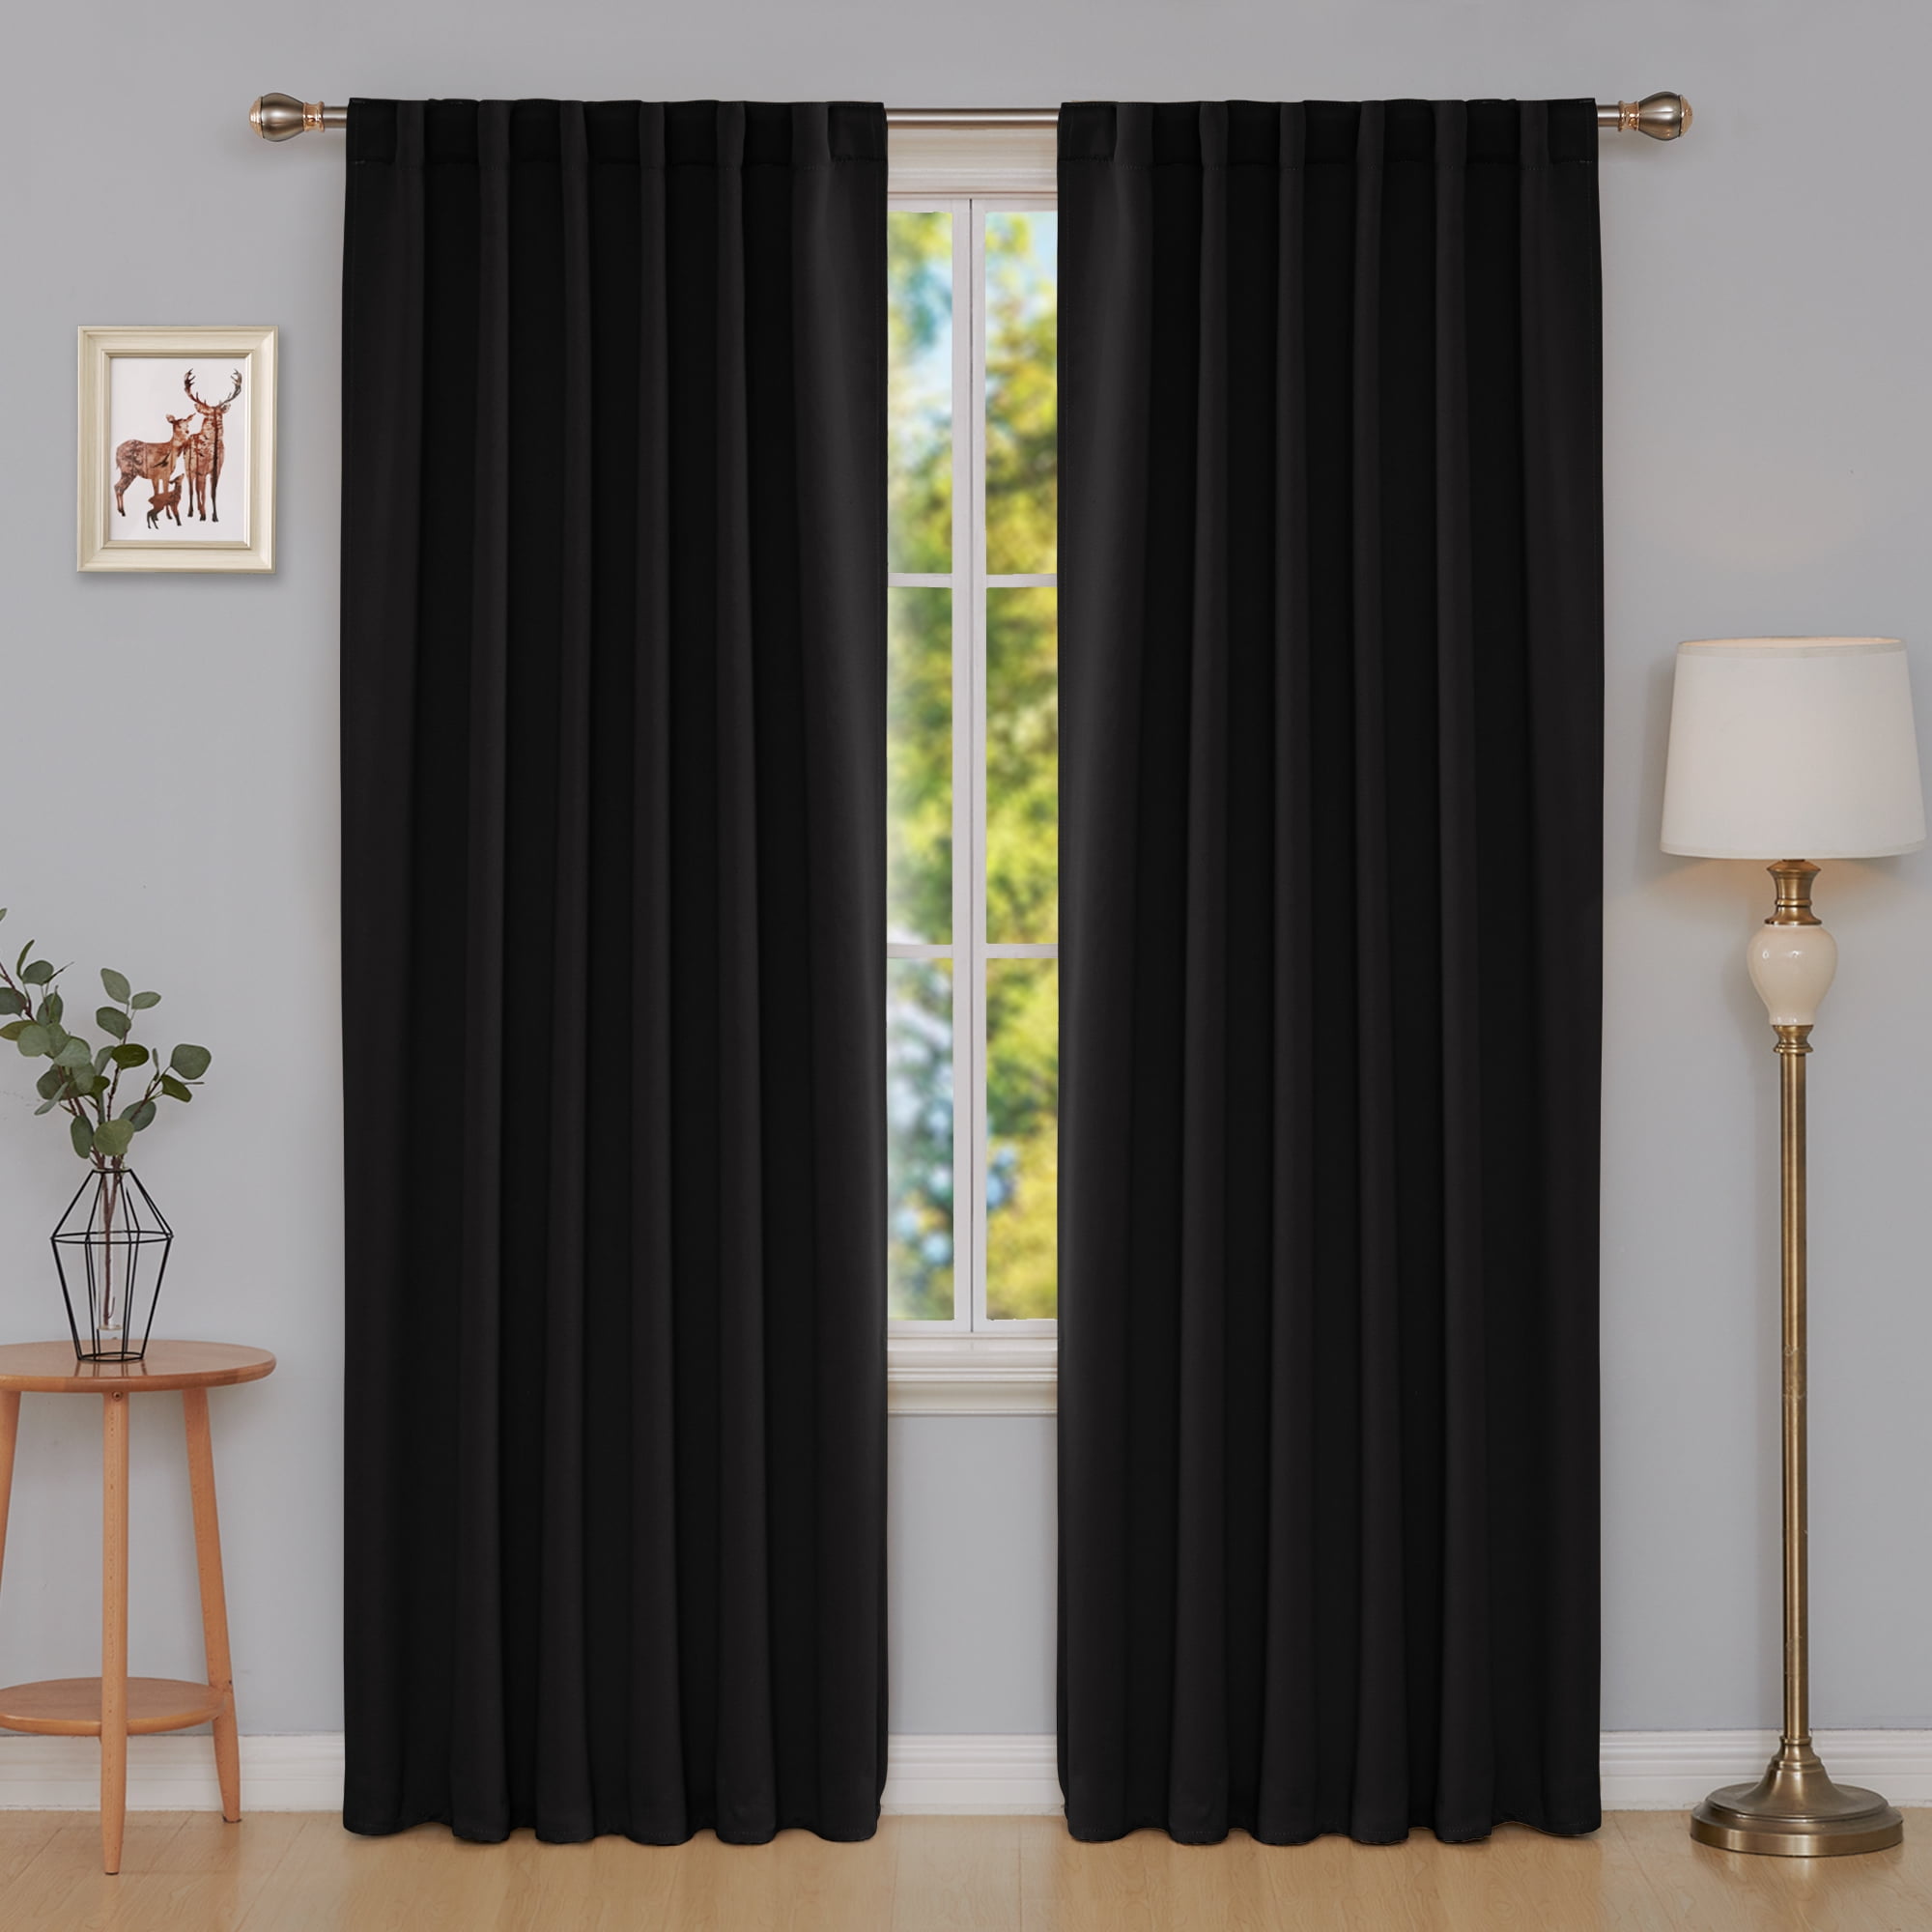 Deconovo Solid Back Tab and Rod Pocket Blackout Curtains Thermal Insulated Drapes and Curtains for Sliding Glass Door 52x95 inch Black Set of 2 Panels